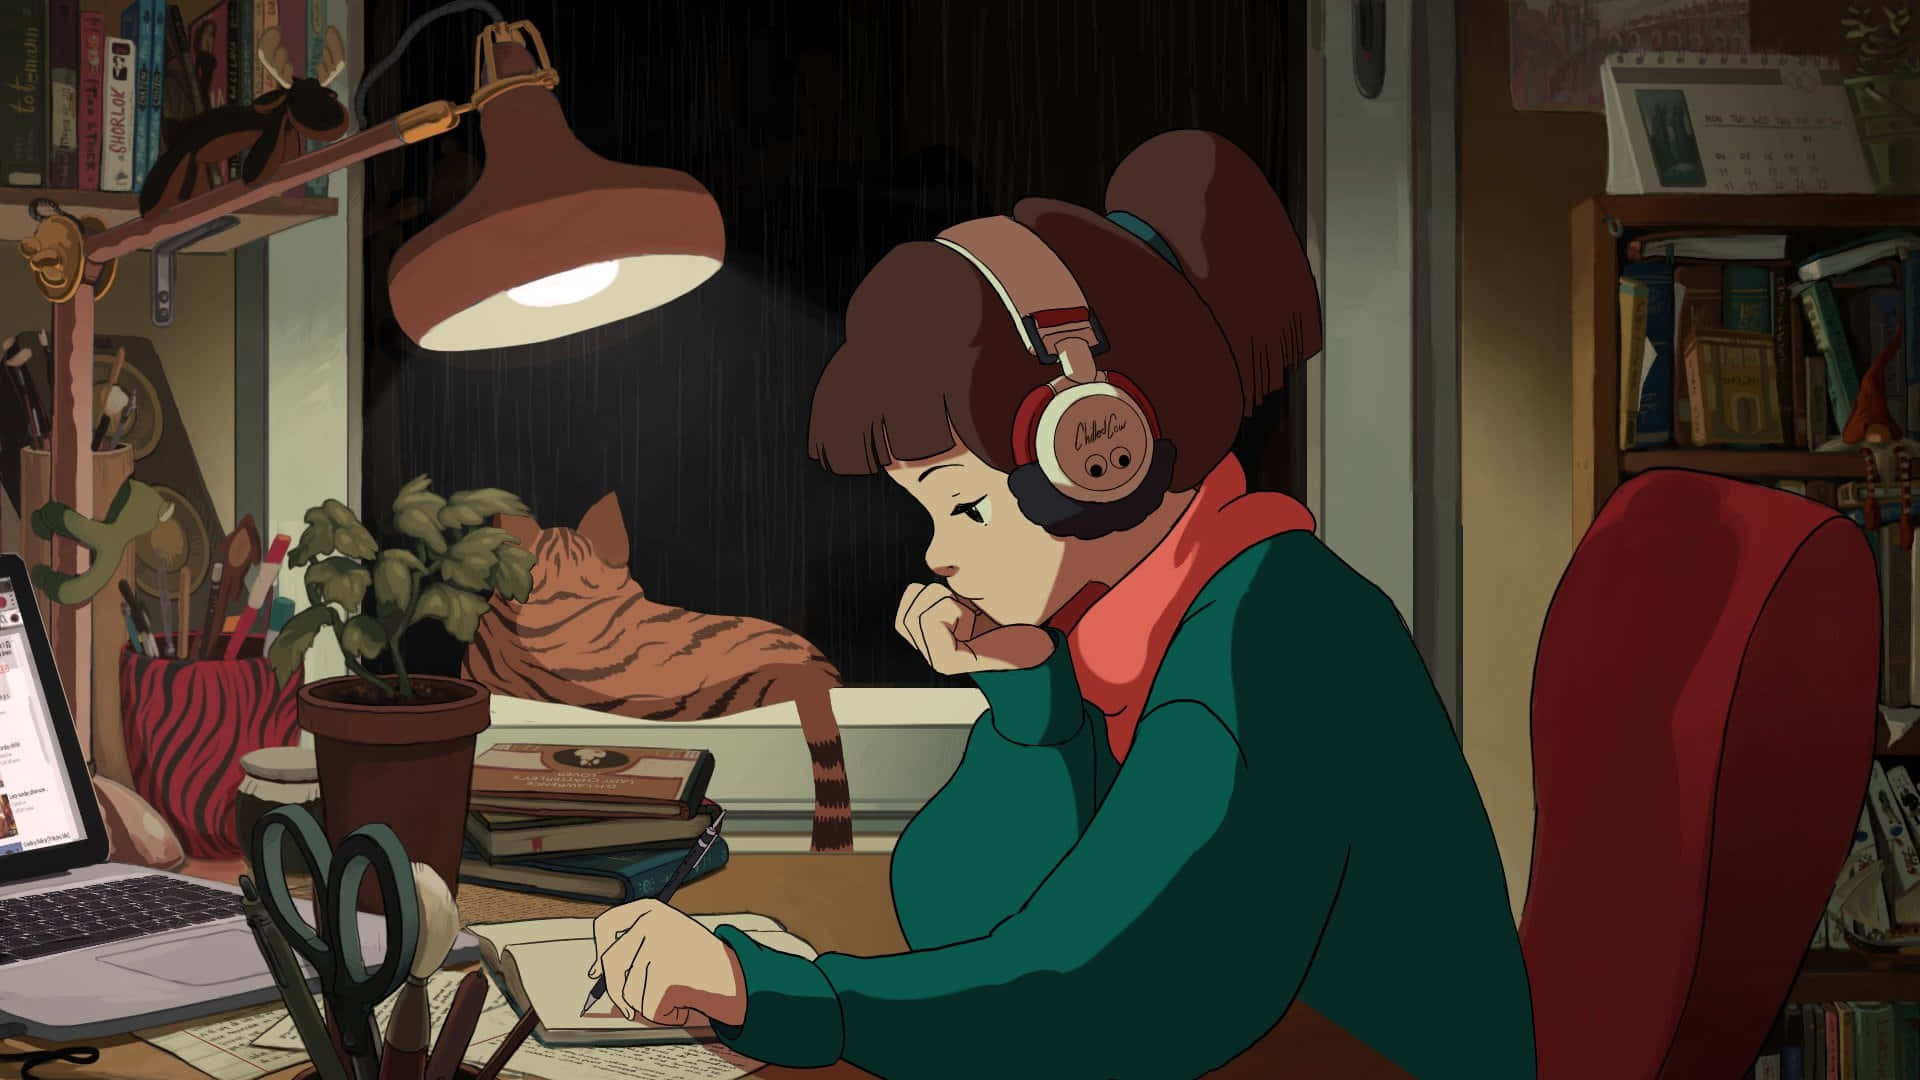 A Girl Sitting At A Desk With Headphones On And A Cat Wallpaper